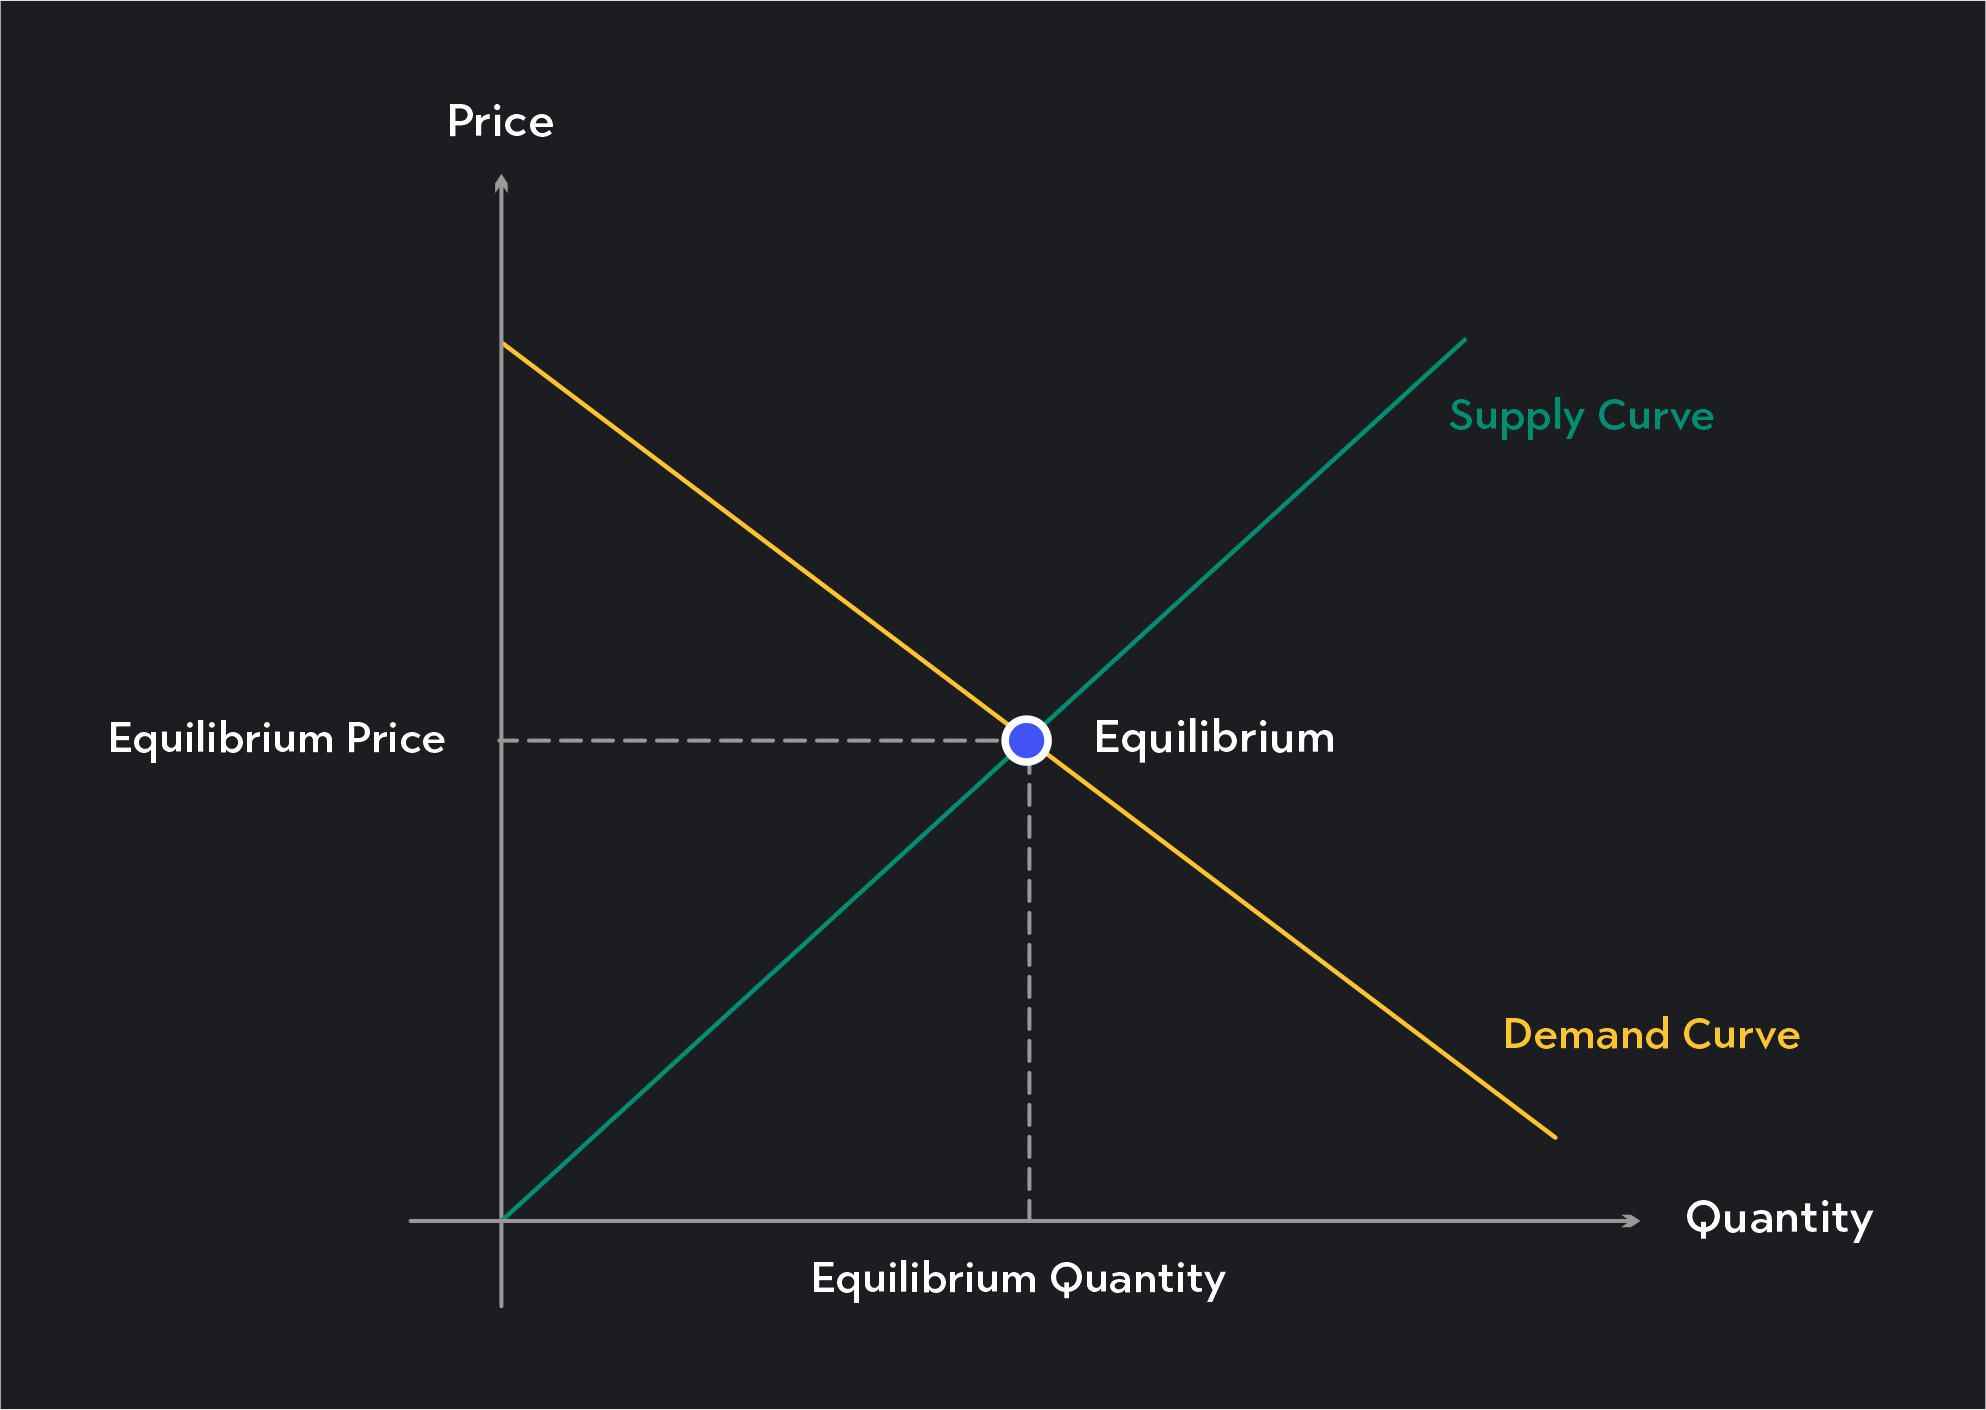 Equilibrium at the intersection of the upward-sloping supply curve and the downward-sloping demand curve on a supply and demand diagram